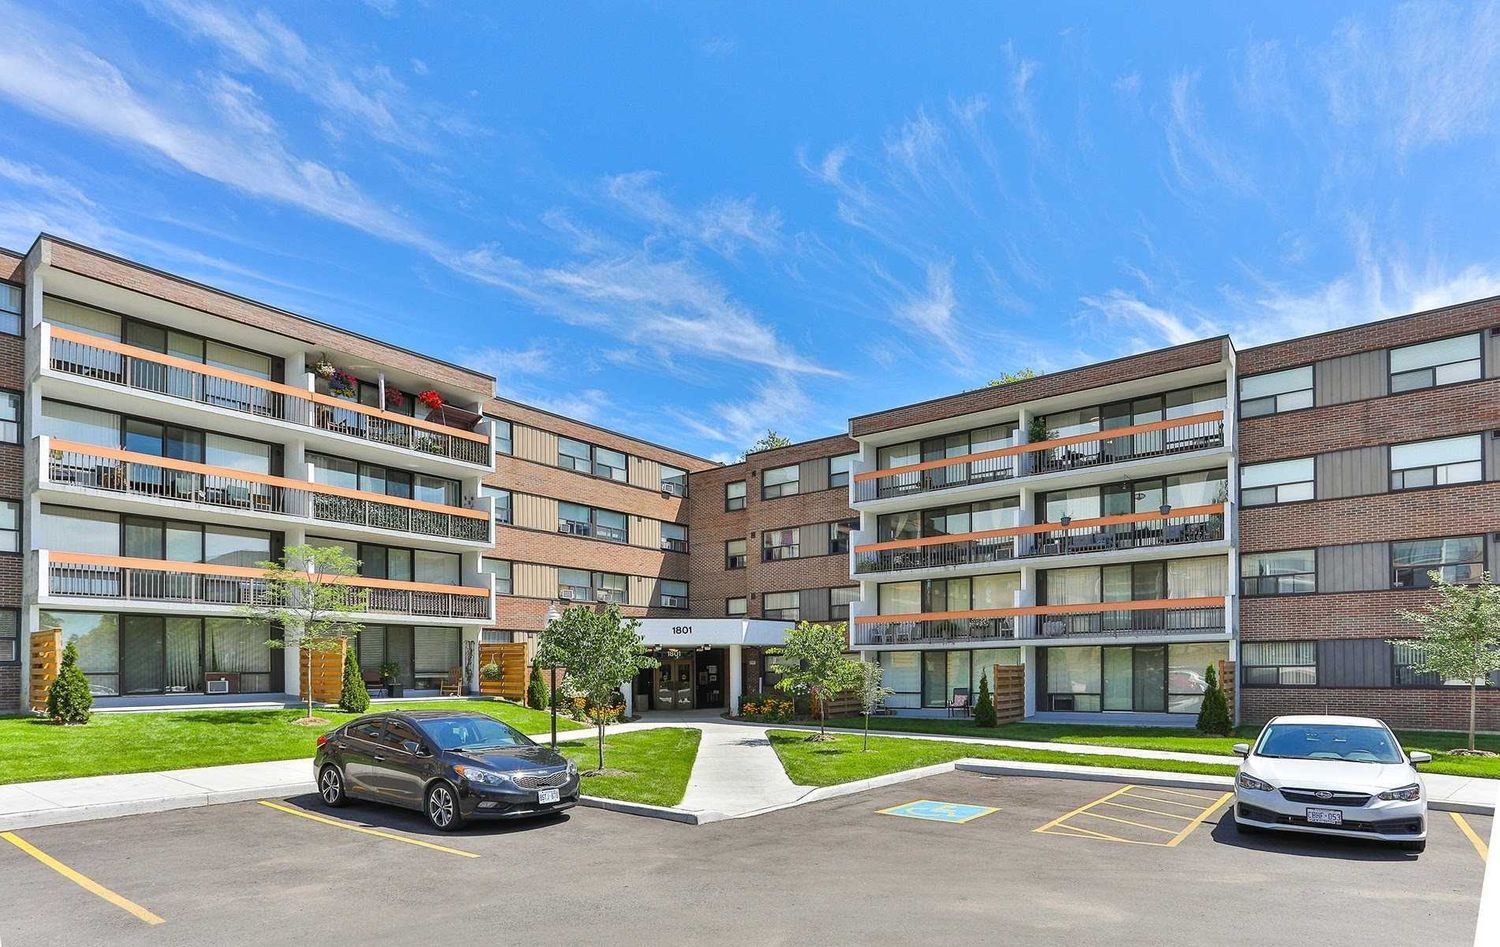 1801-1815 O'Connor Drive. 1801-1815 O'Connor Drive Condos is located in  North York, Toronto - image #1 of 2